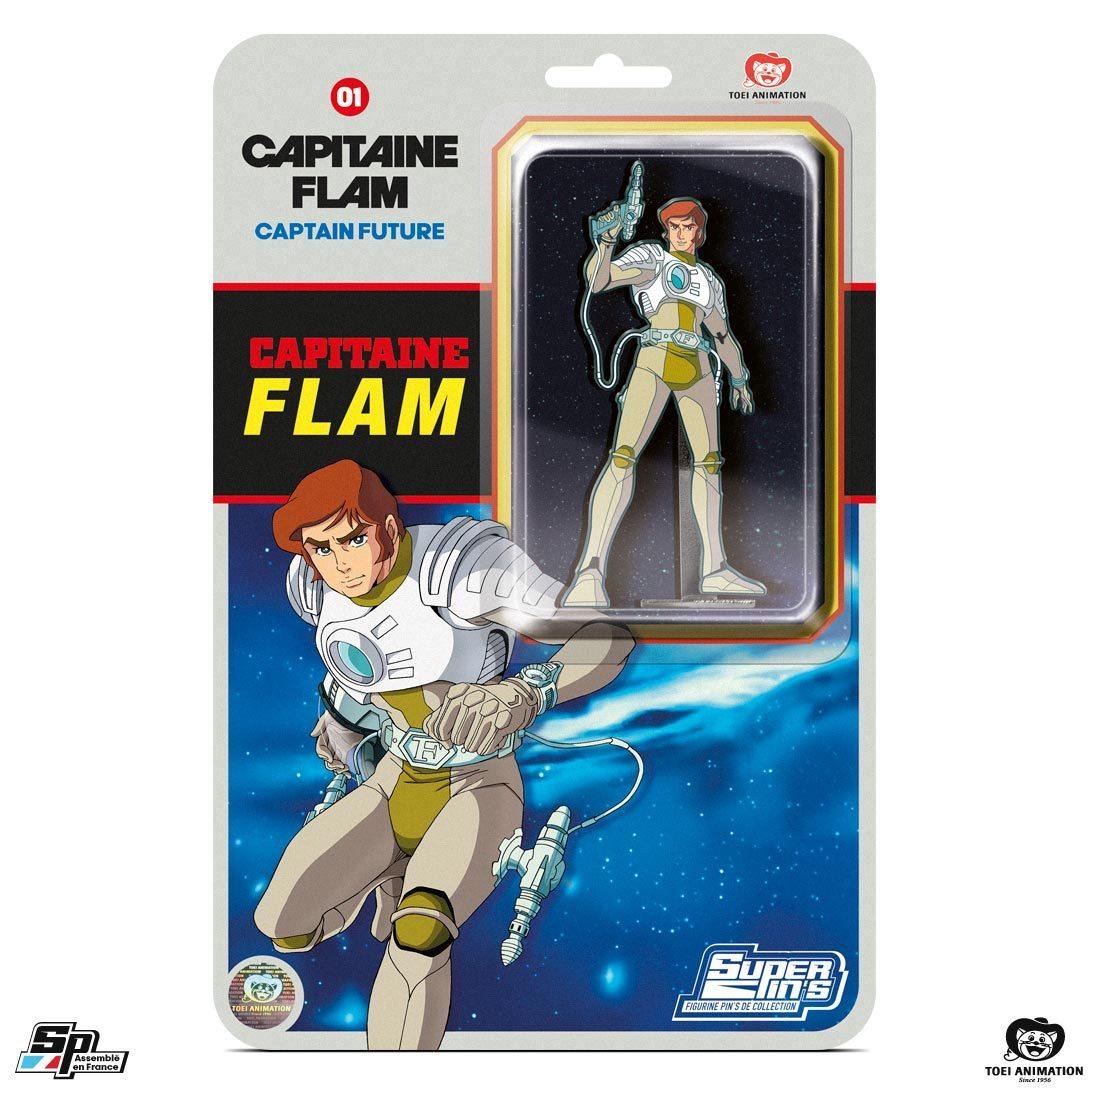 Capitaine Flam - Figurine/Pin's 10 cm en blister card - Limited editio –  sp-collections